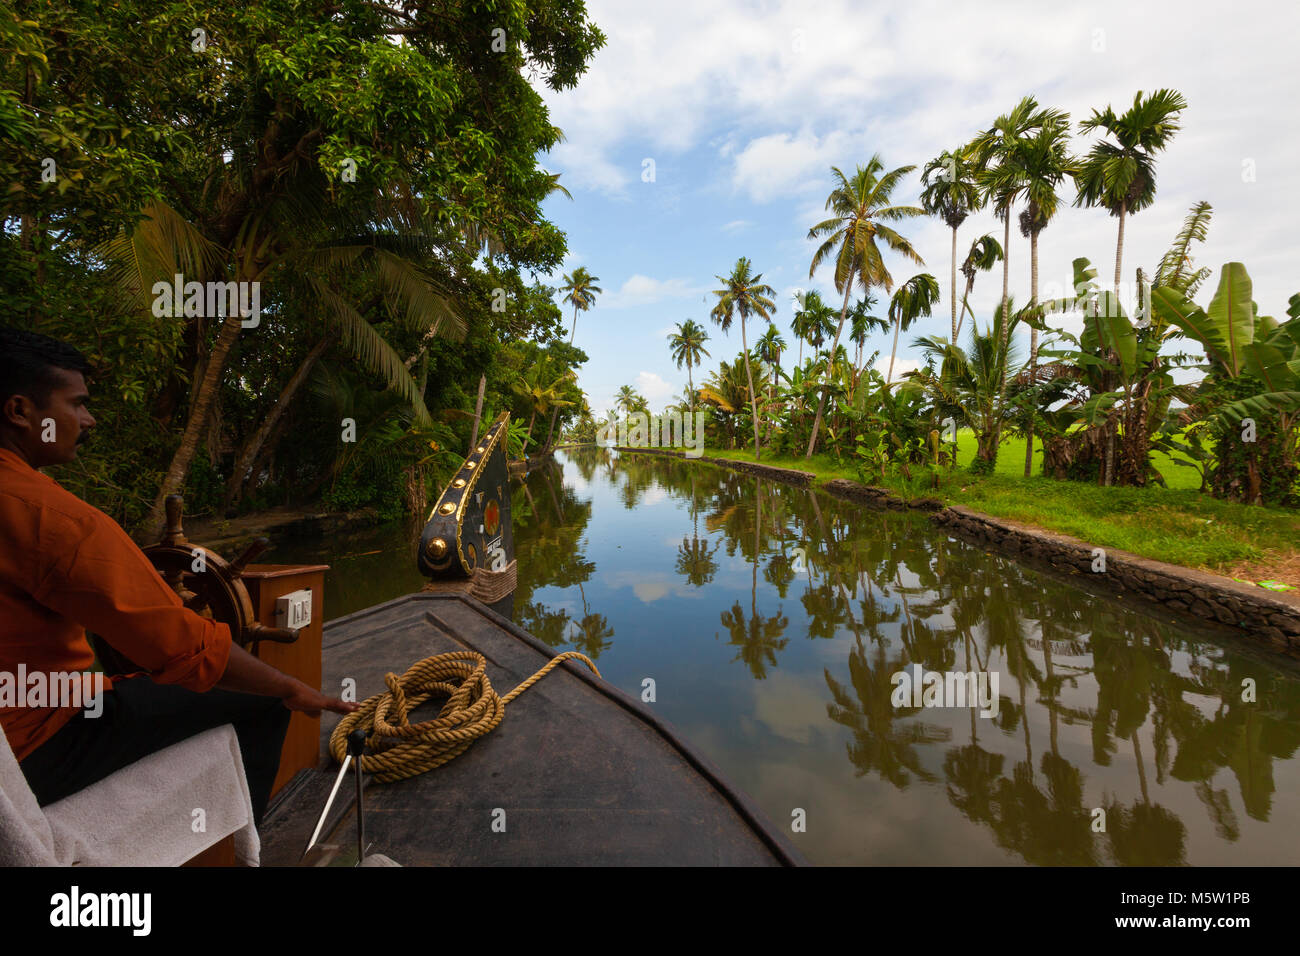 The helmsman steering a houseboat on the backwaters near Alleppey and Kumarakom in Kerala, India. Stock Photo